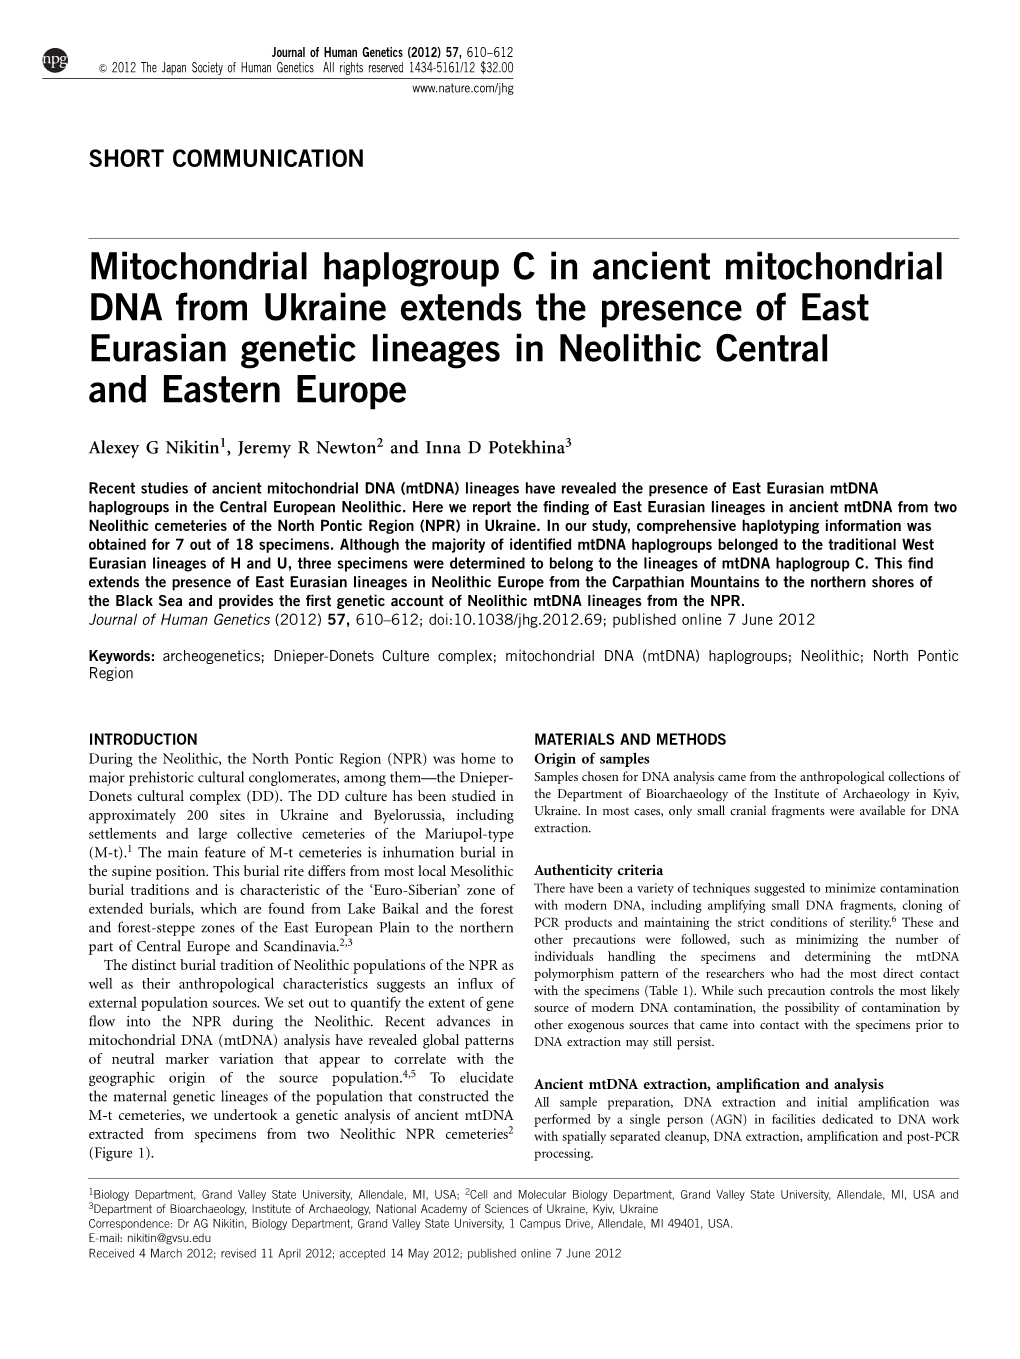 Mitochondrial Haplogroup C in Ancient Mitochondrial DNA from Ukraine Extends the Presence of East Eurasian Genetic Lineages in Neolithic Central and Eastern Europe